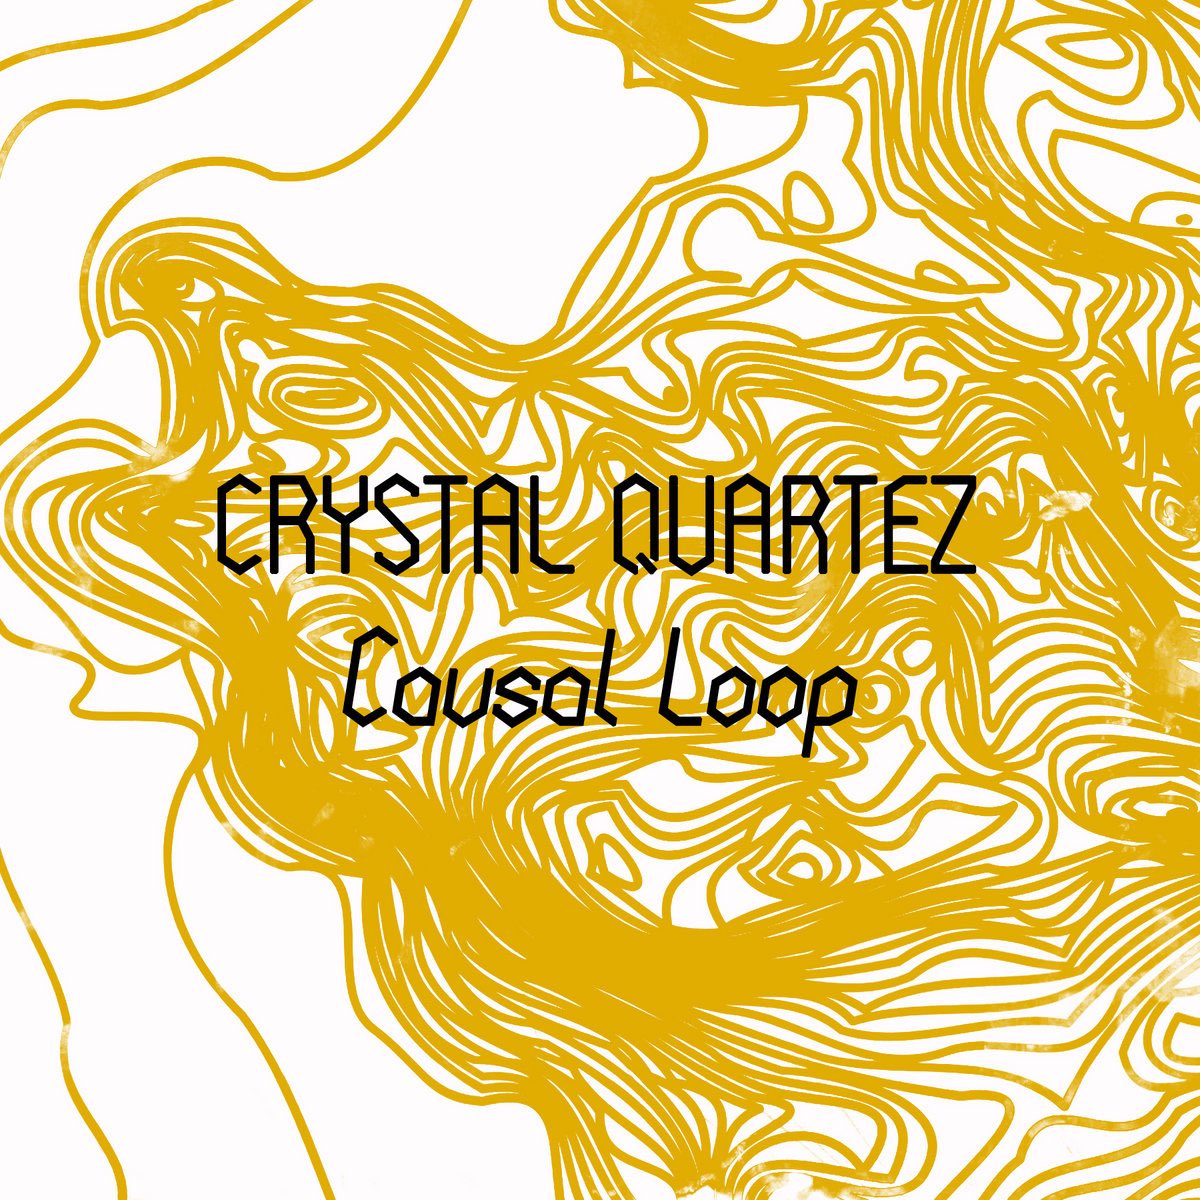 57. Crystal Quartez - Causal Loop (local artist makes a legit great synthy new wave record)